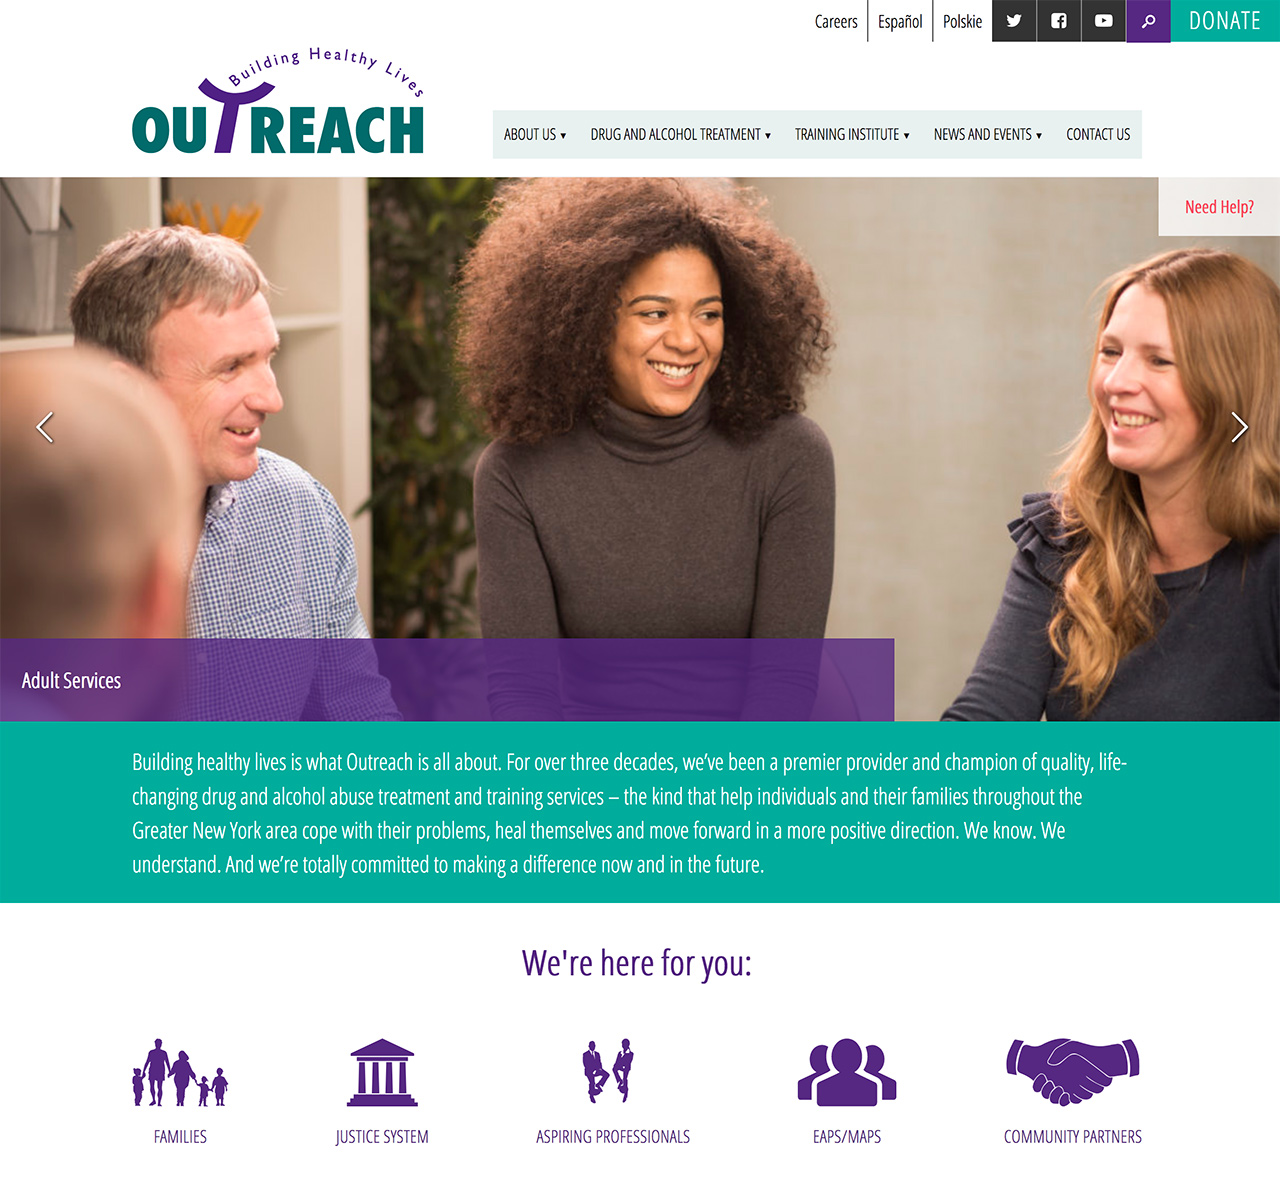 New Horizons for Outreach